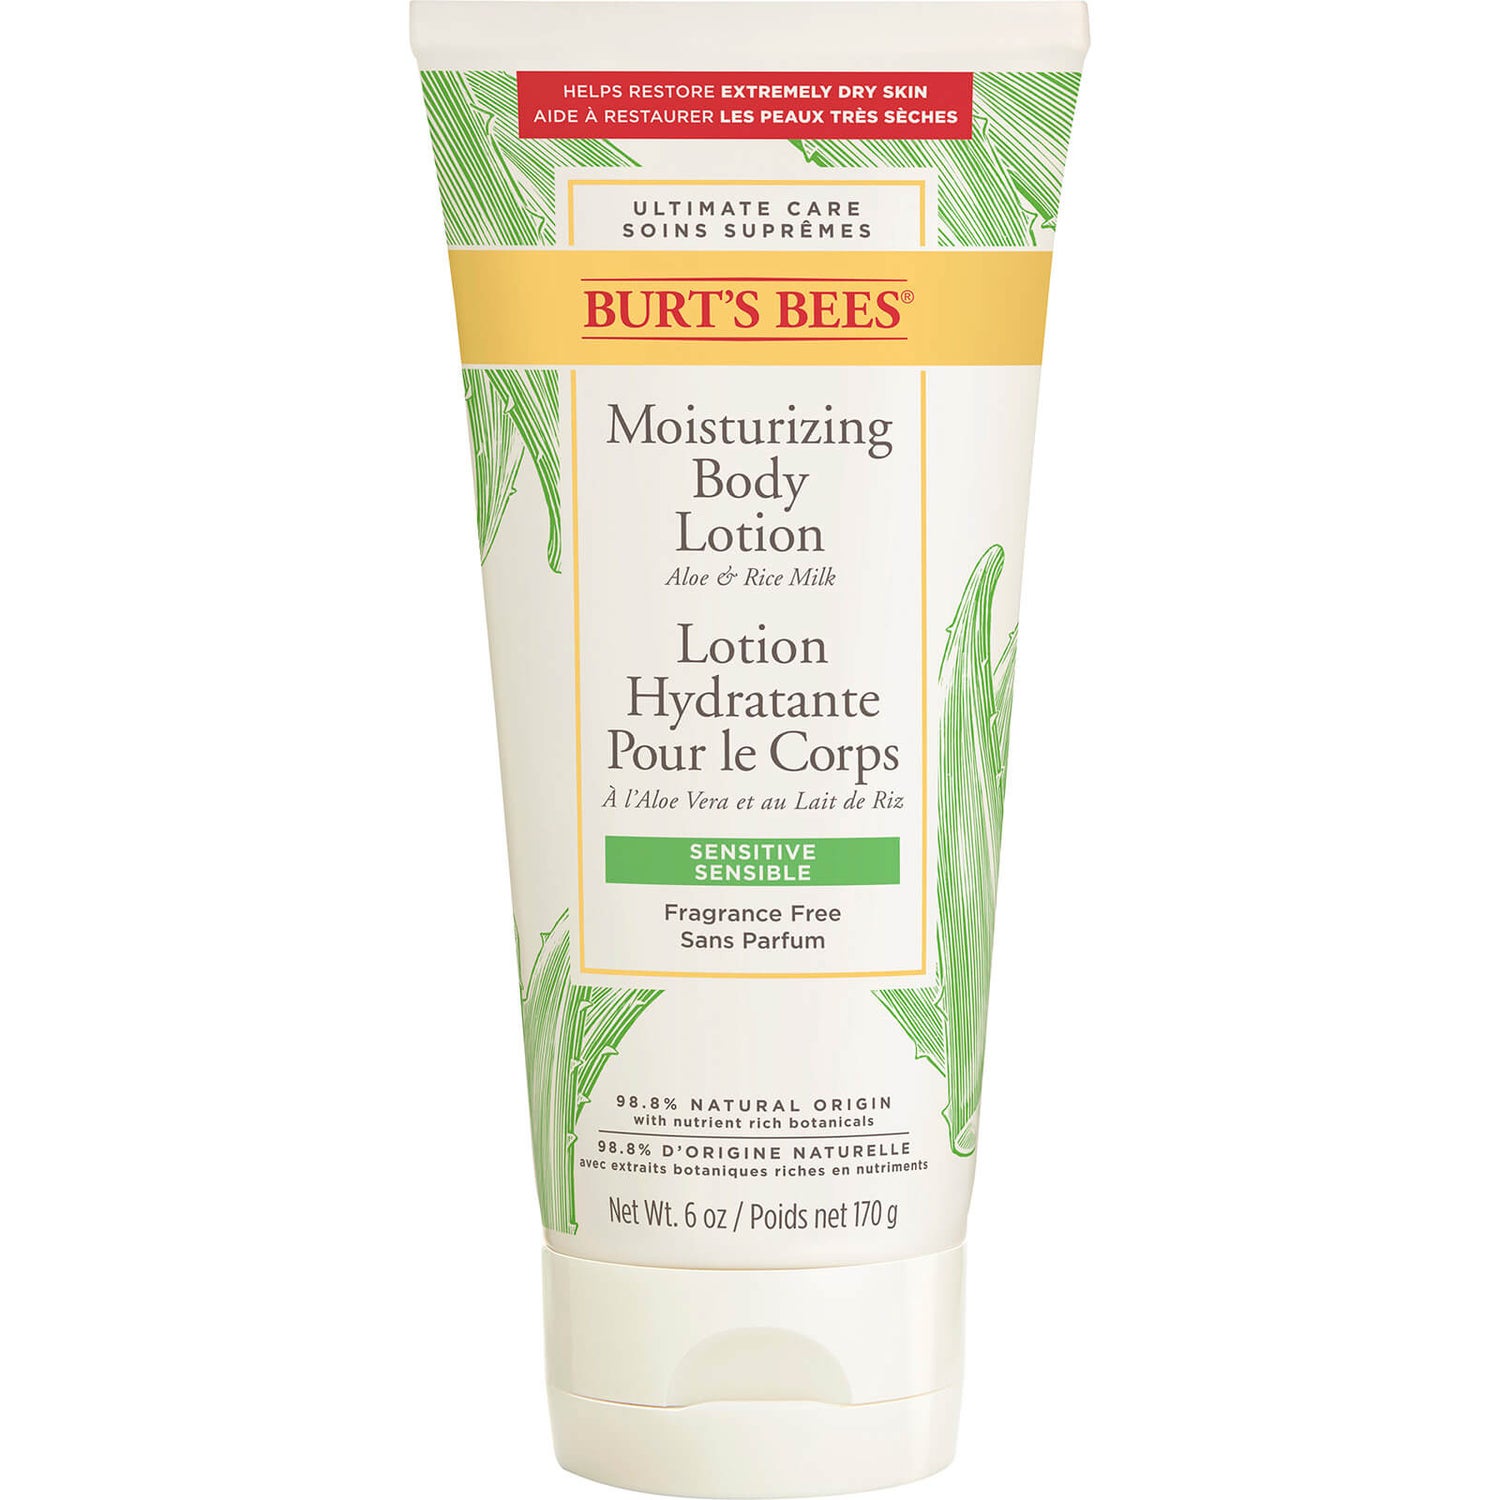 Burt's Bees Ultimate Care Body Lotion (170g)